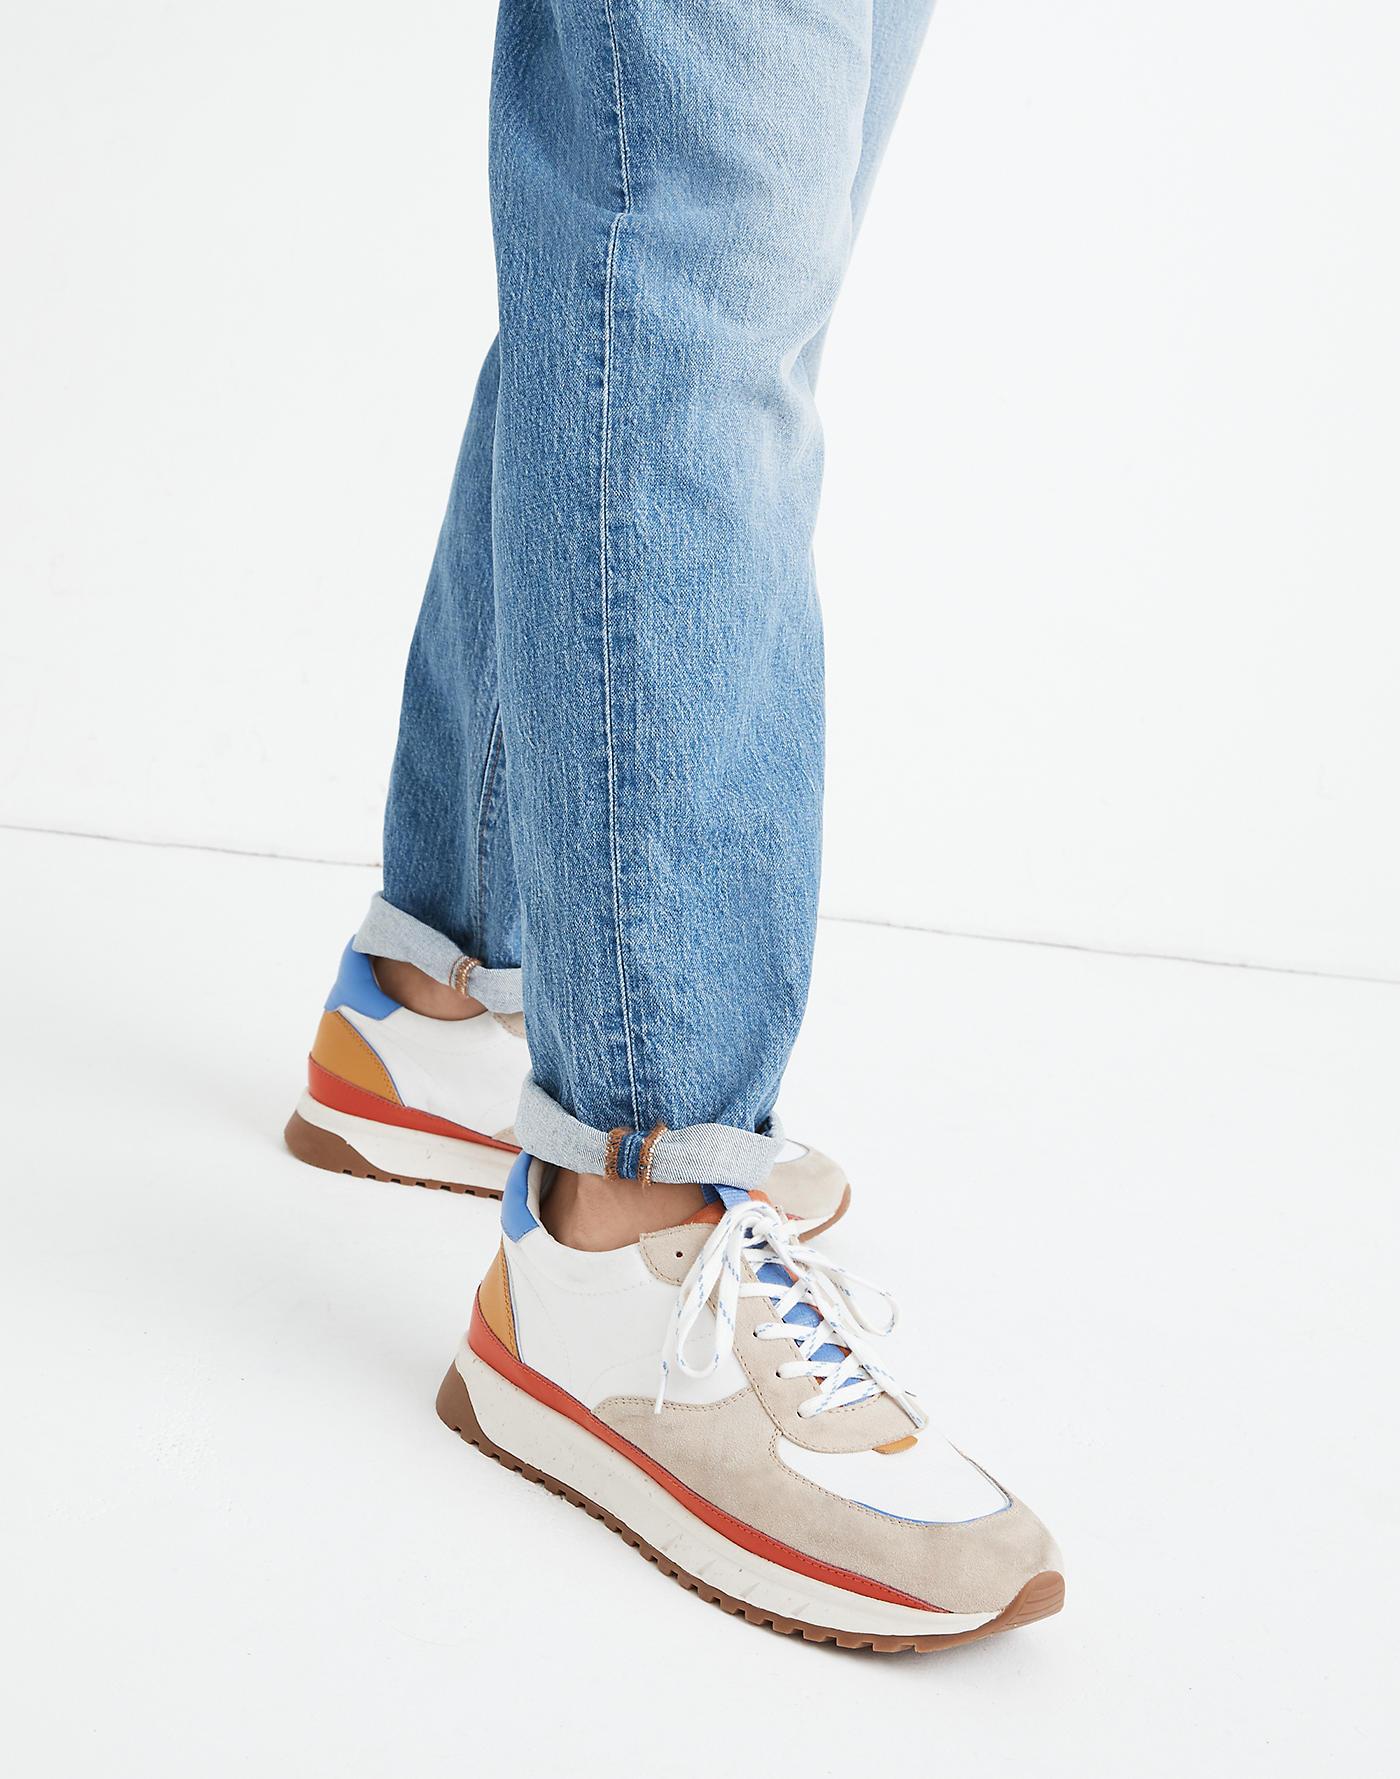 MW Kickoff Trainer Sneakers In Canvas, Suede And Leather for Men - Lyst